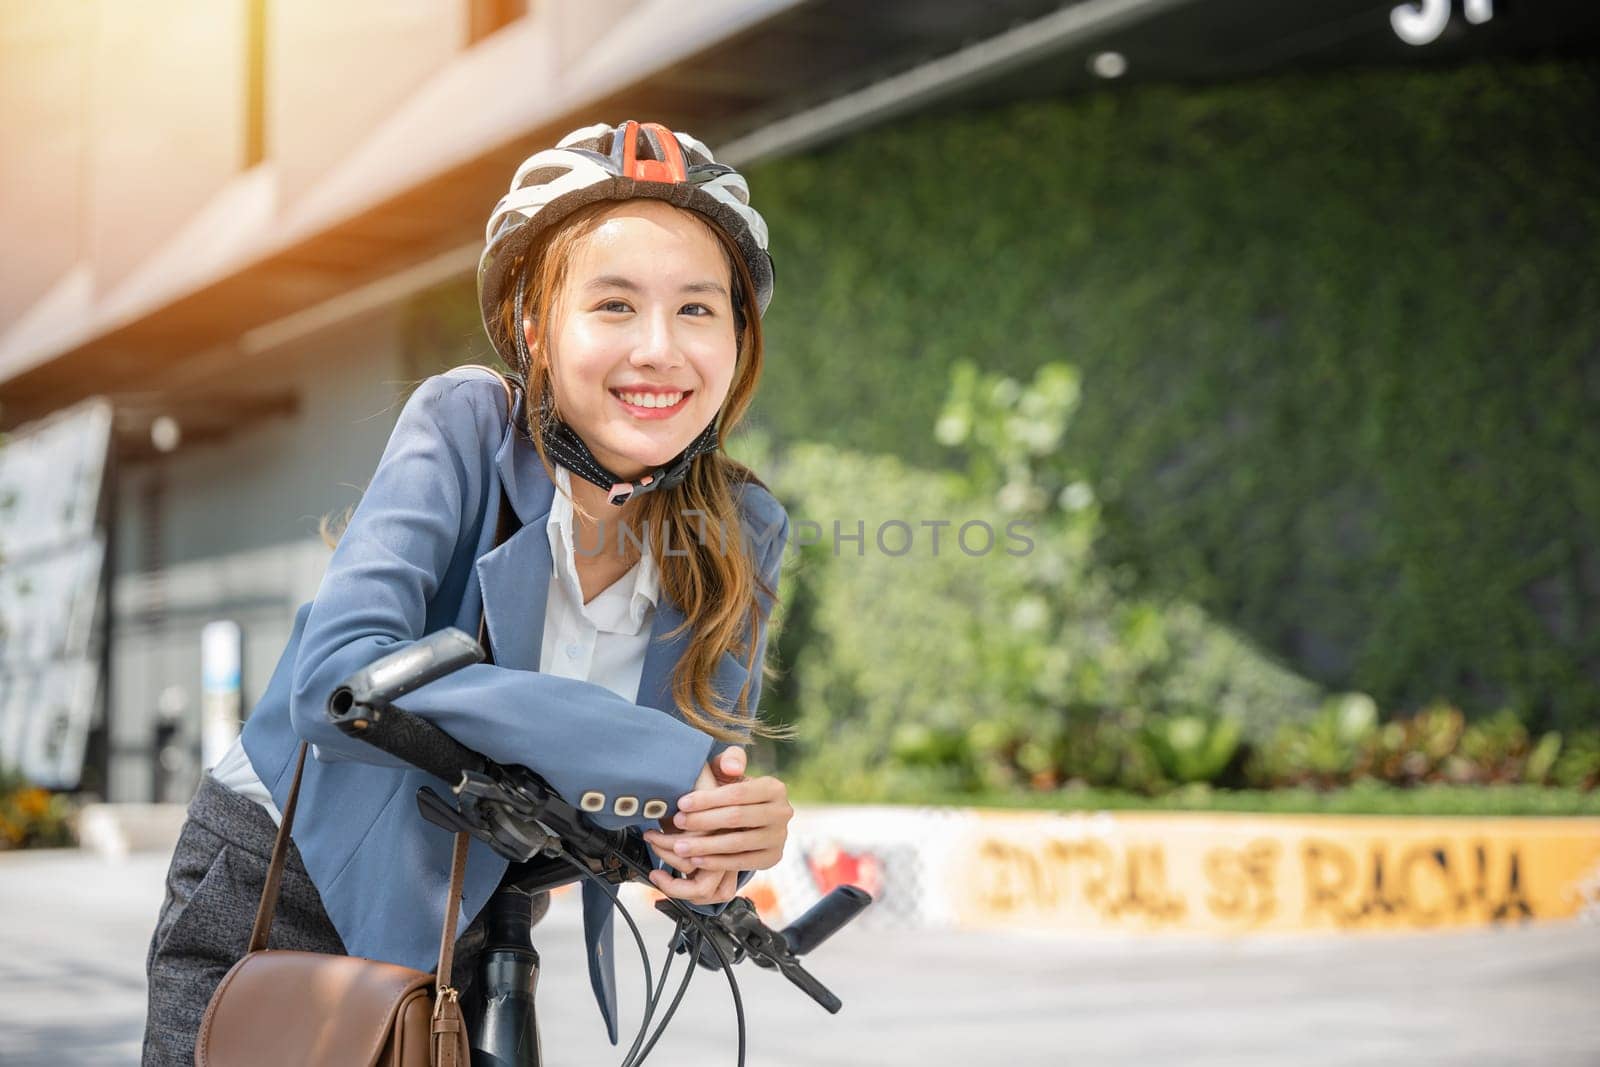 In the city an Asian businesswoman helmeted and in a suit stands with her bicycle ready for a cheerful morning commute to the office. This image combines work and outdoor fun. by Sorapop